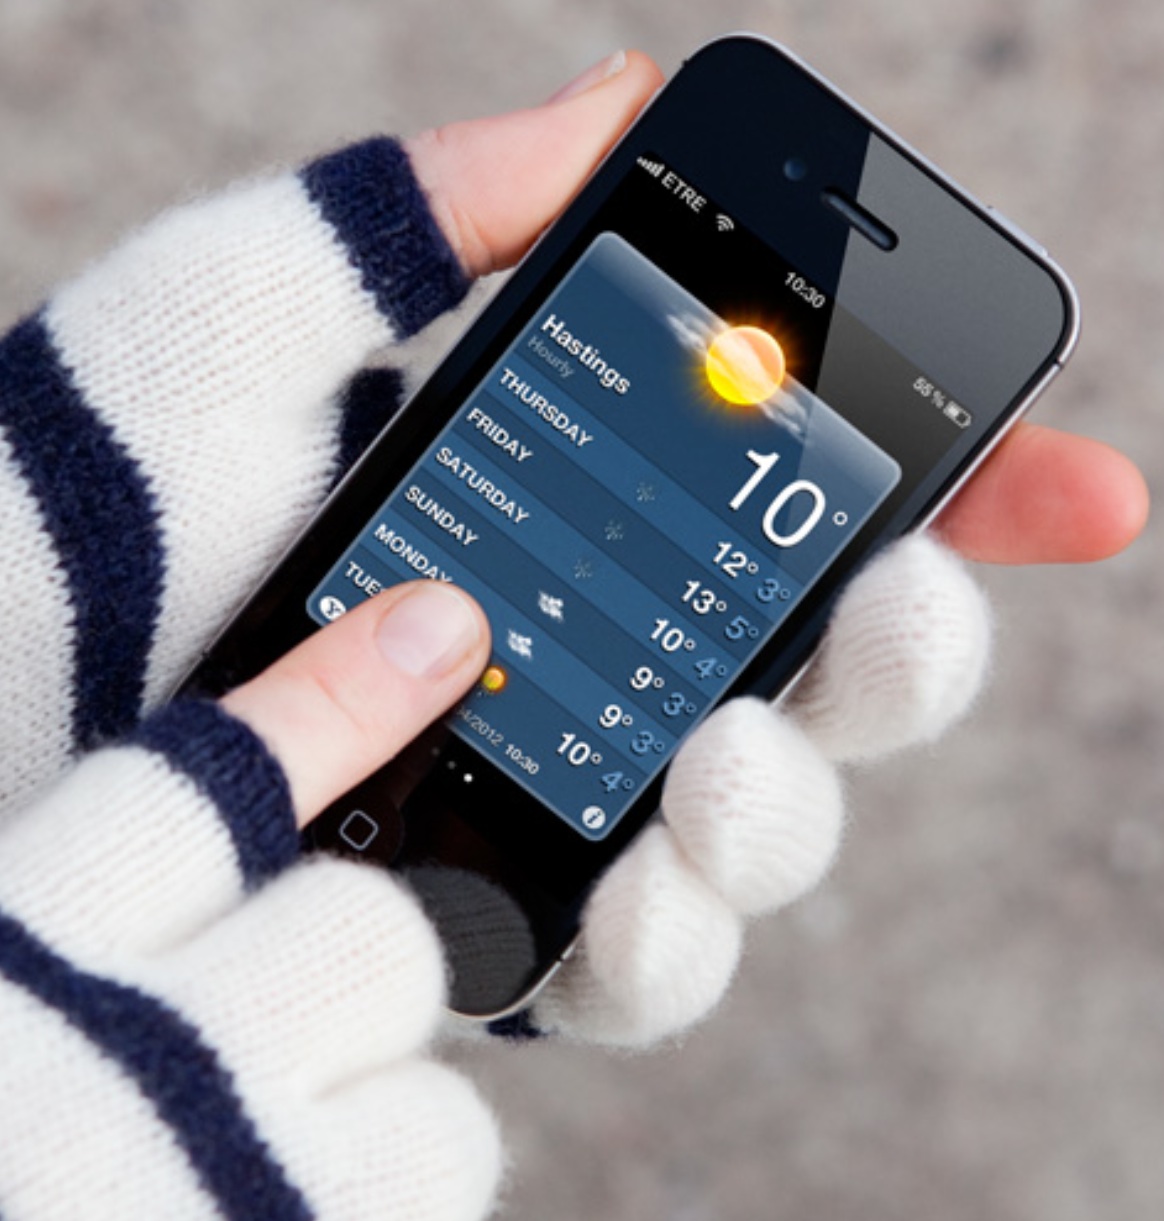 etre touchy gloves You Can Use With Your iPhone